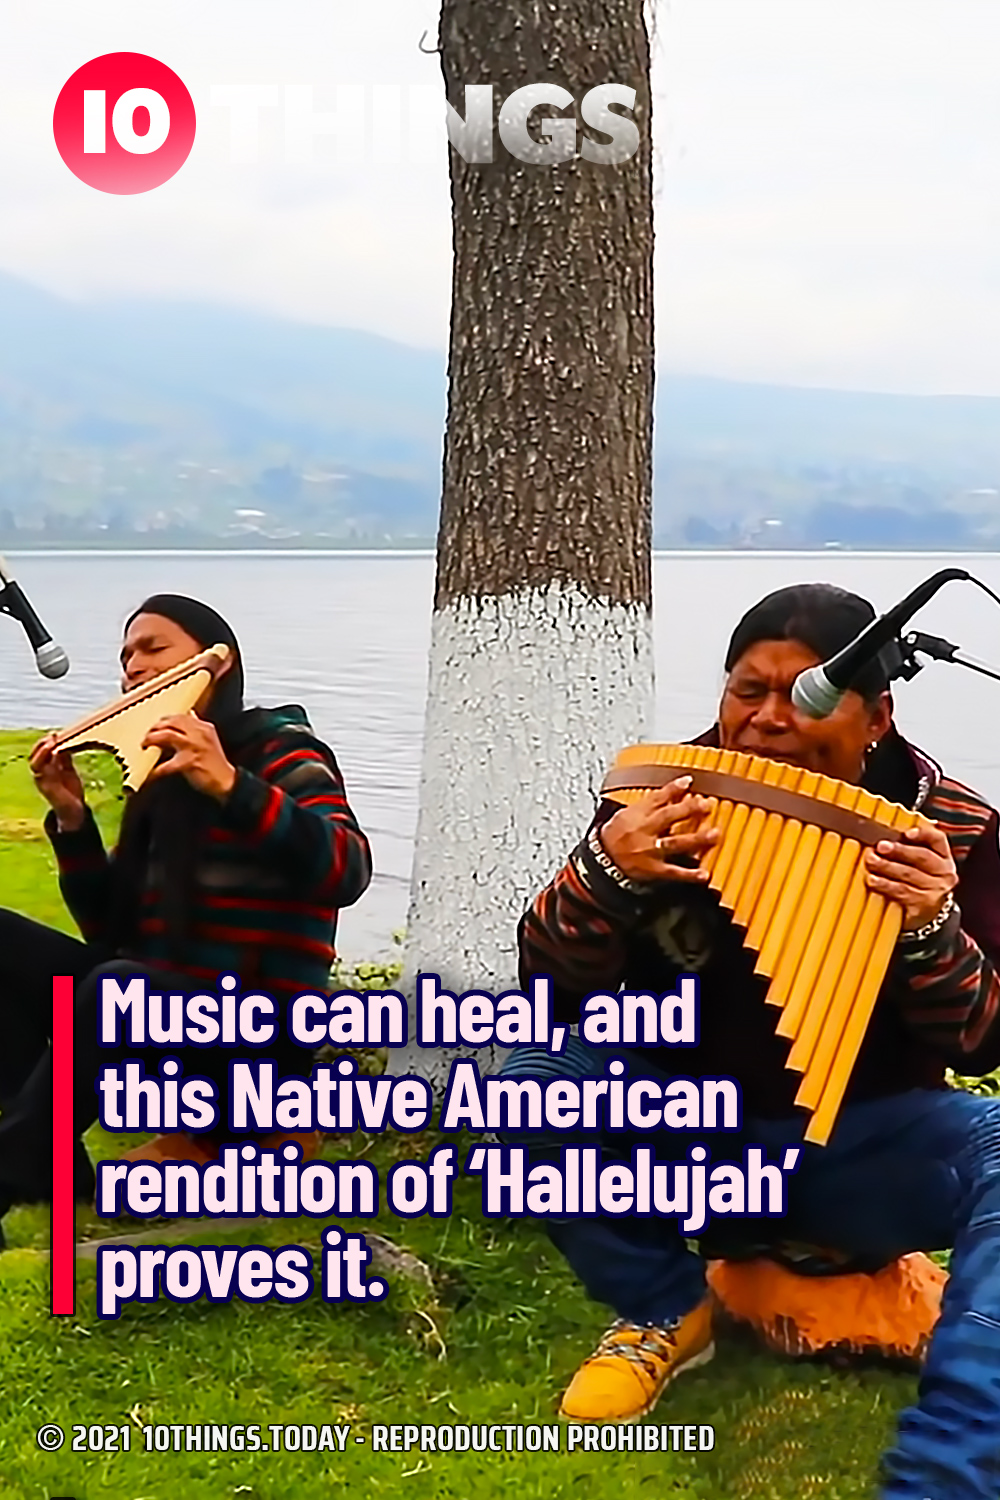 Music can heal, and this Native American rendition of ‘Hallelujah’ proves it.